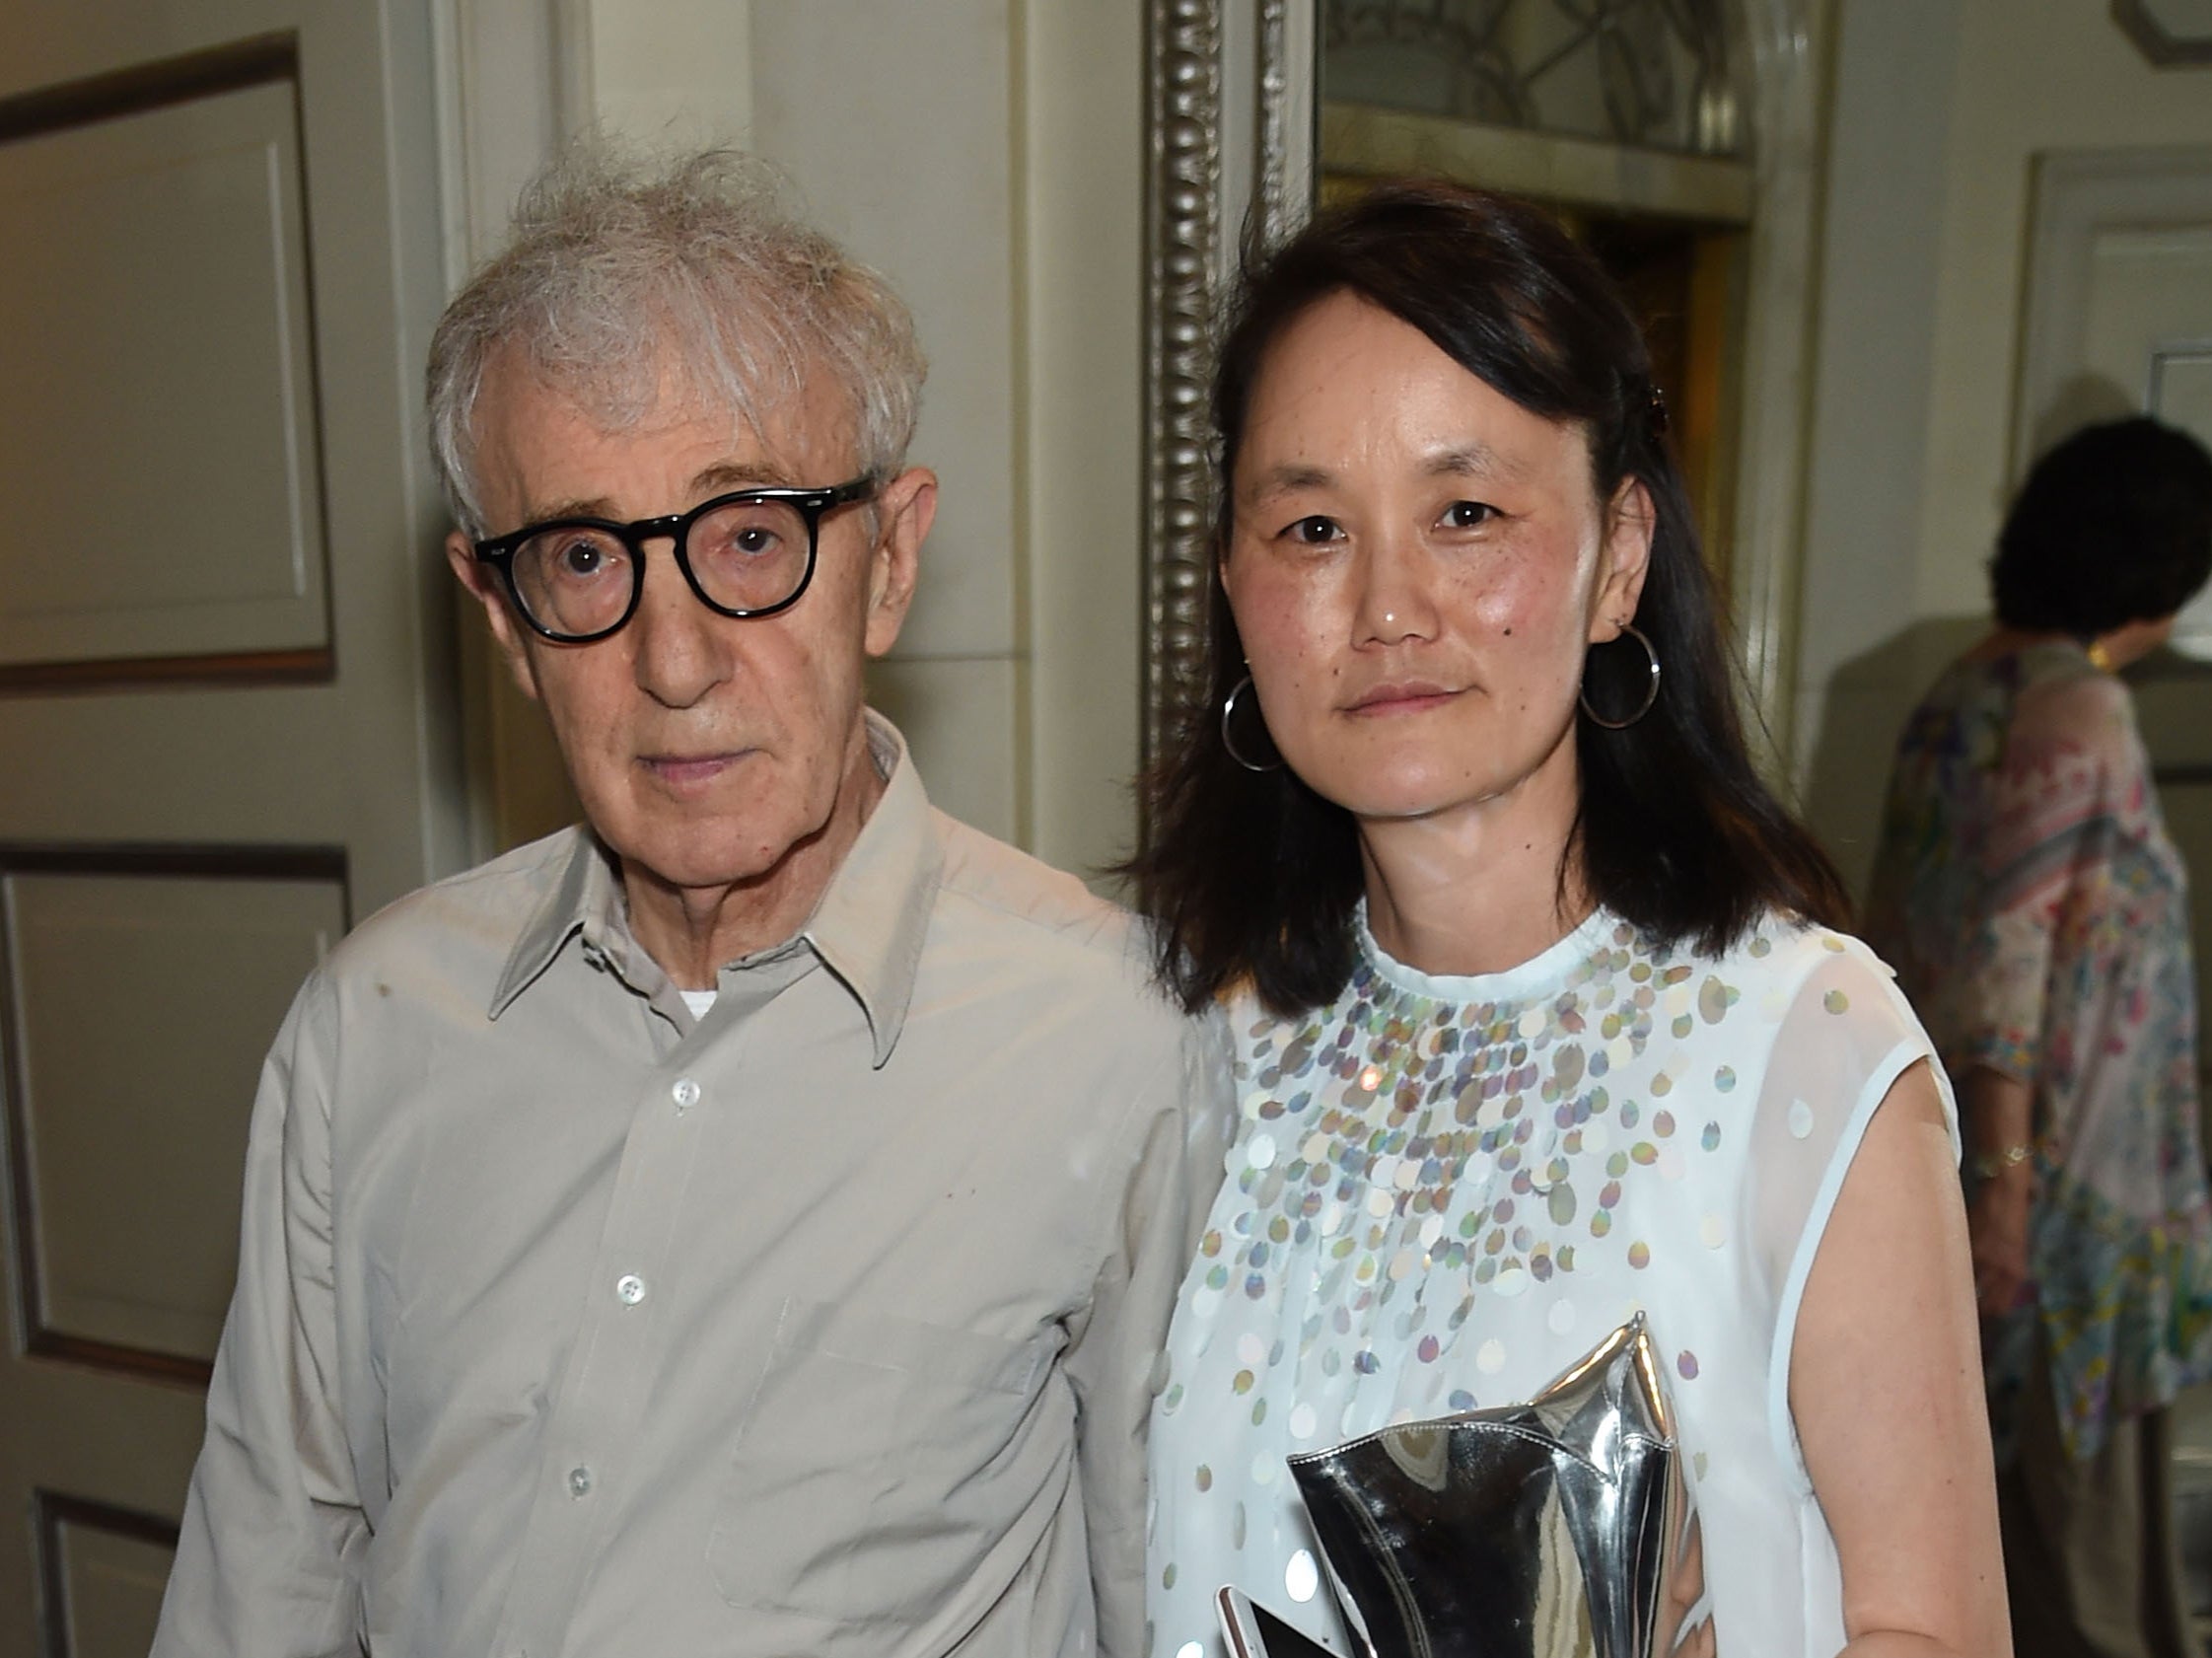 Woody Allen and Soon-Yi Previn photographed in 2016